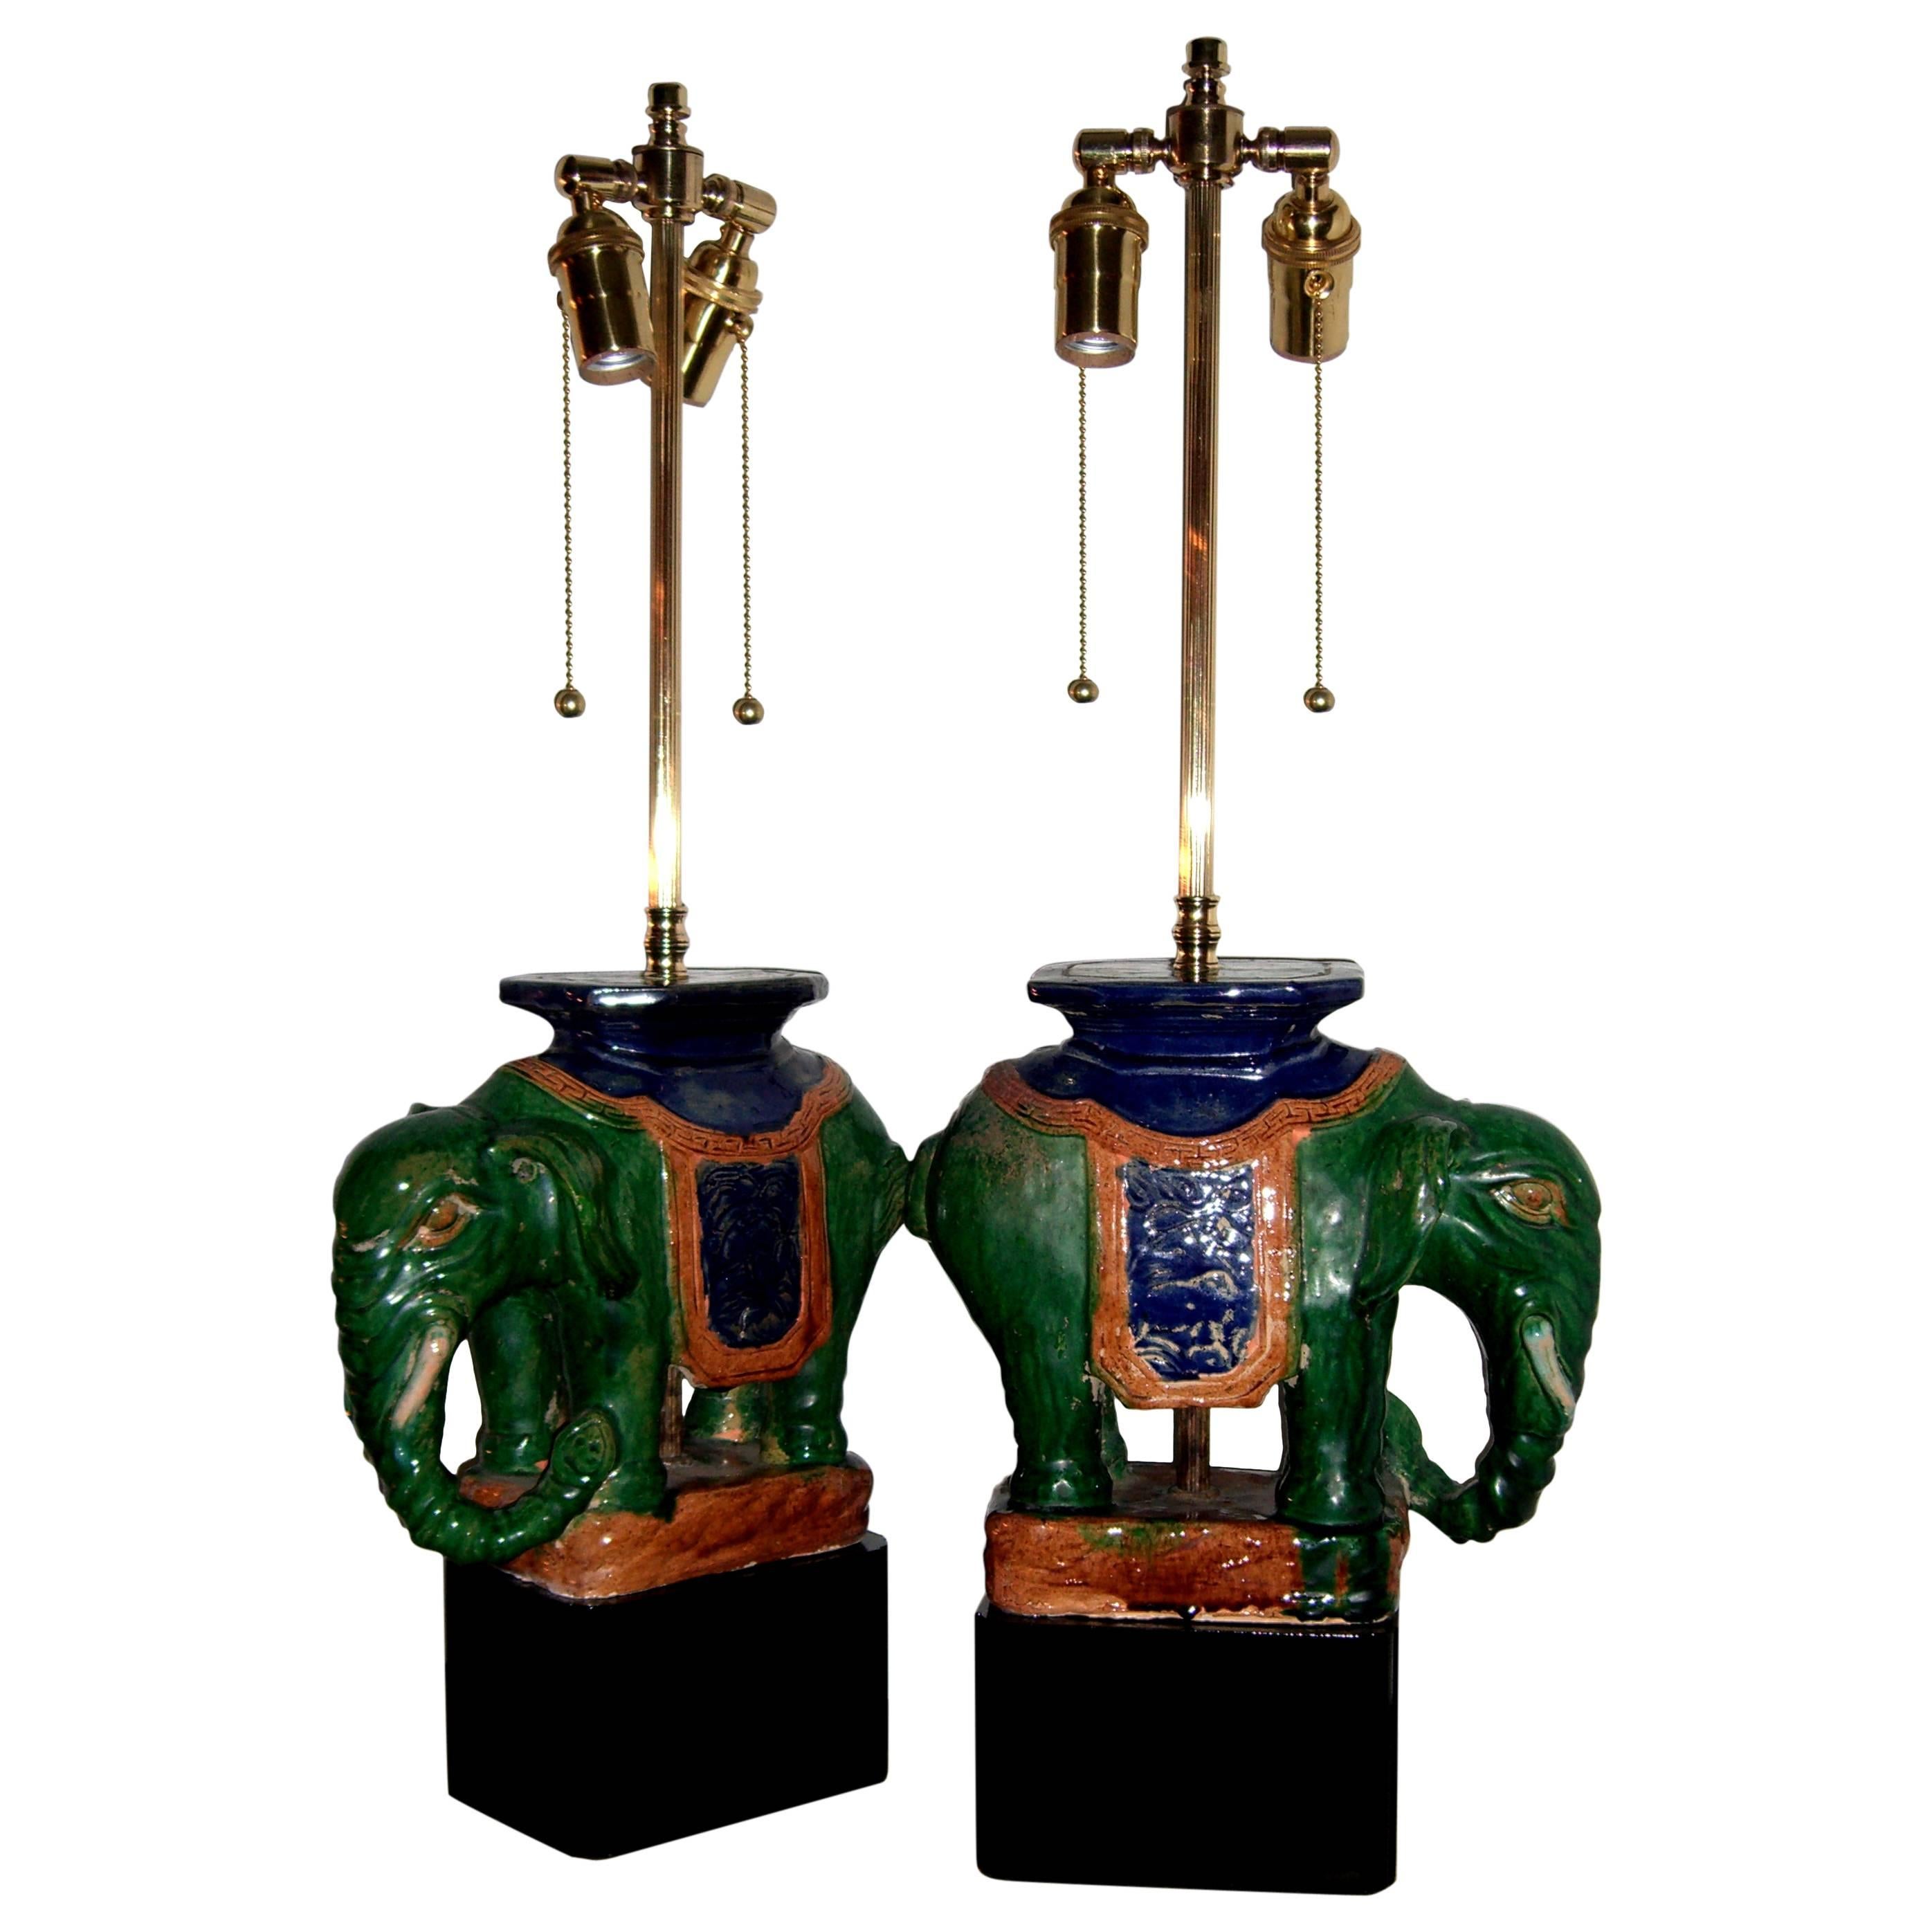 Pair of Vintage Chinese Porcelain Royal Elephants as Table Lamps